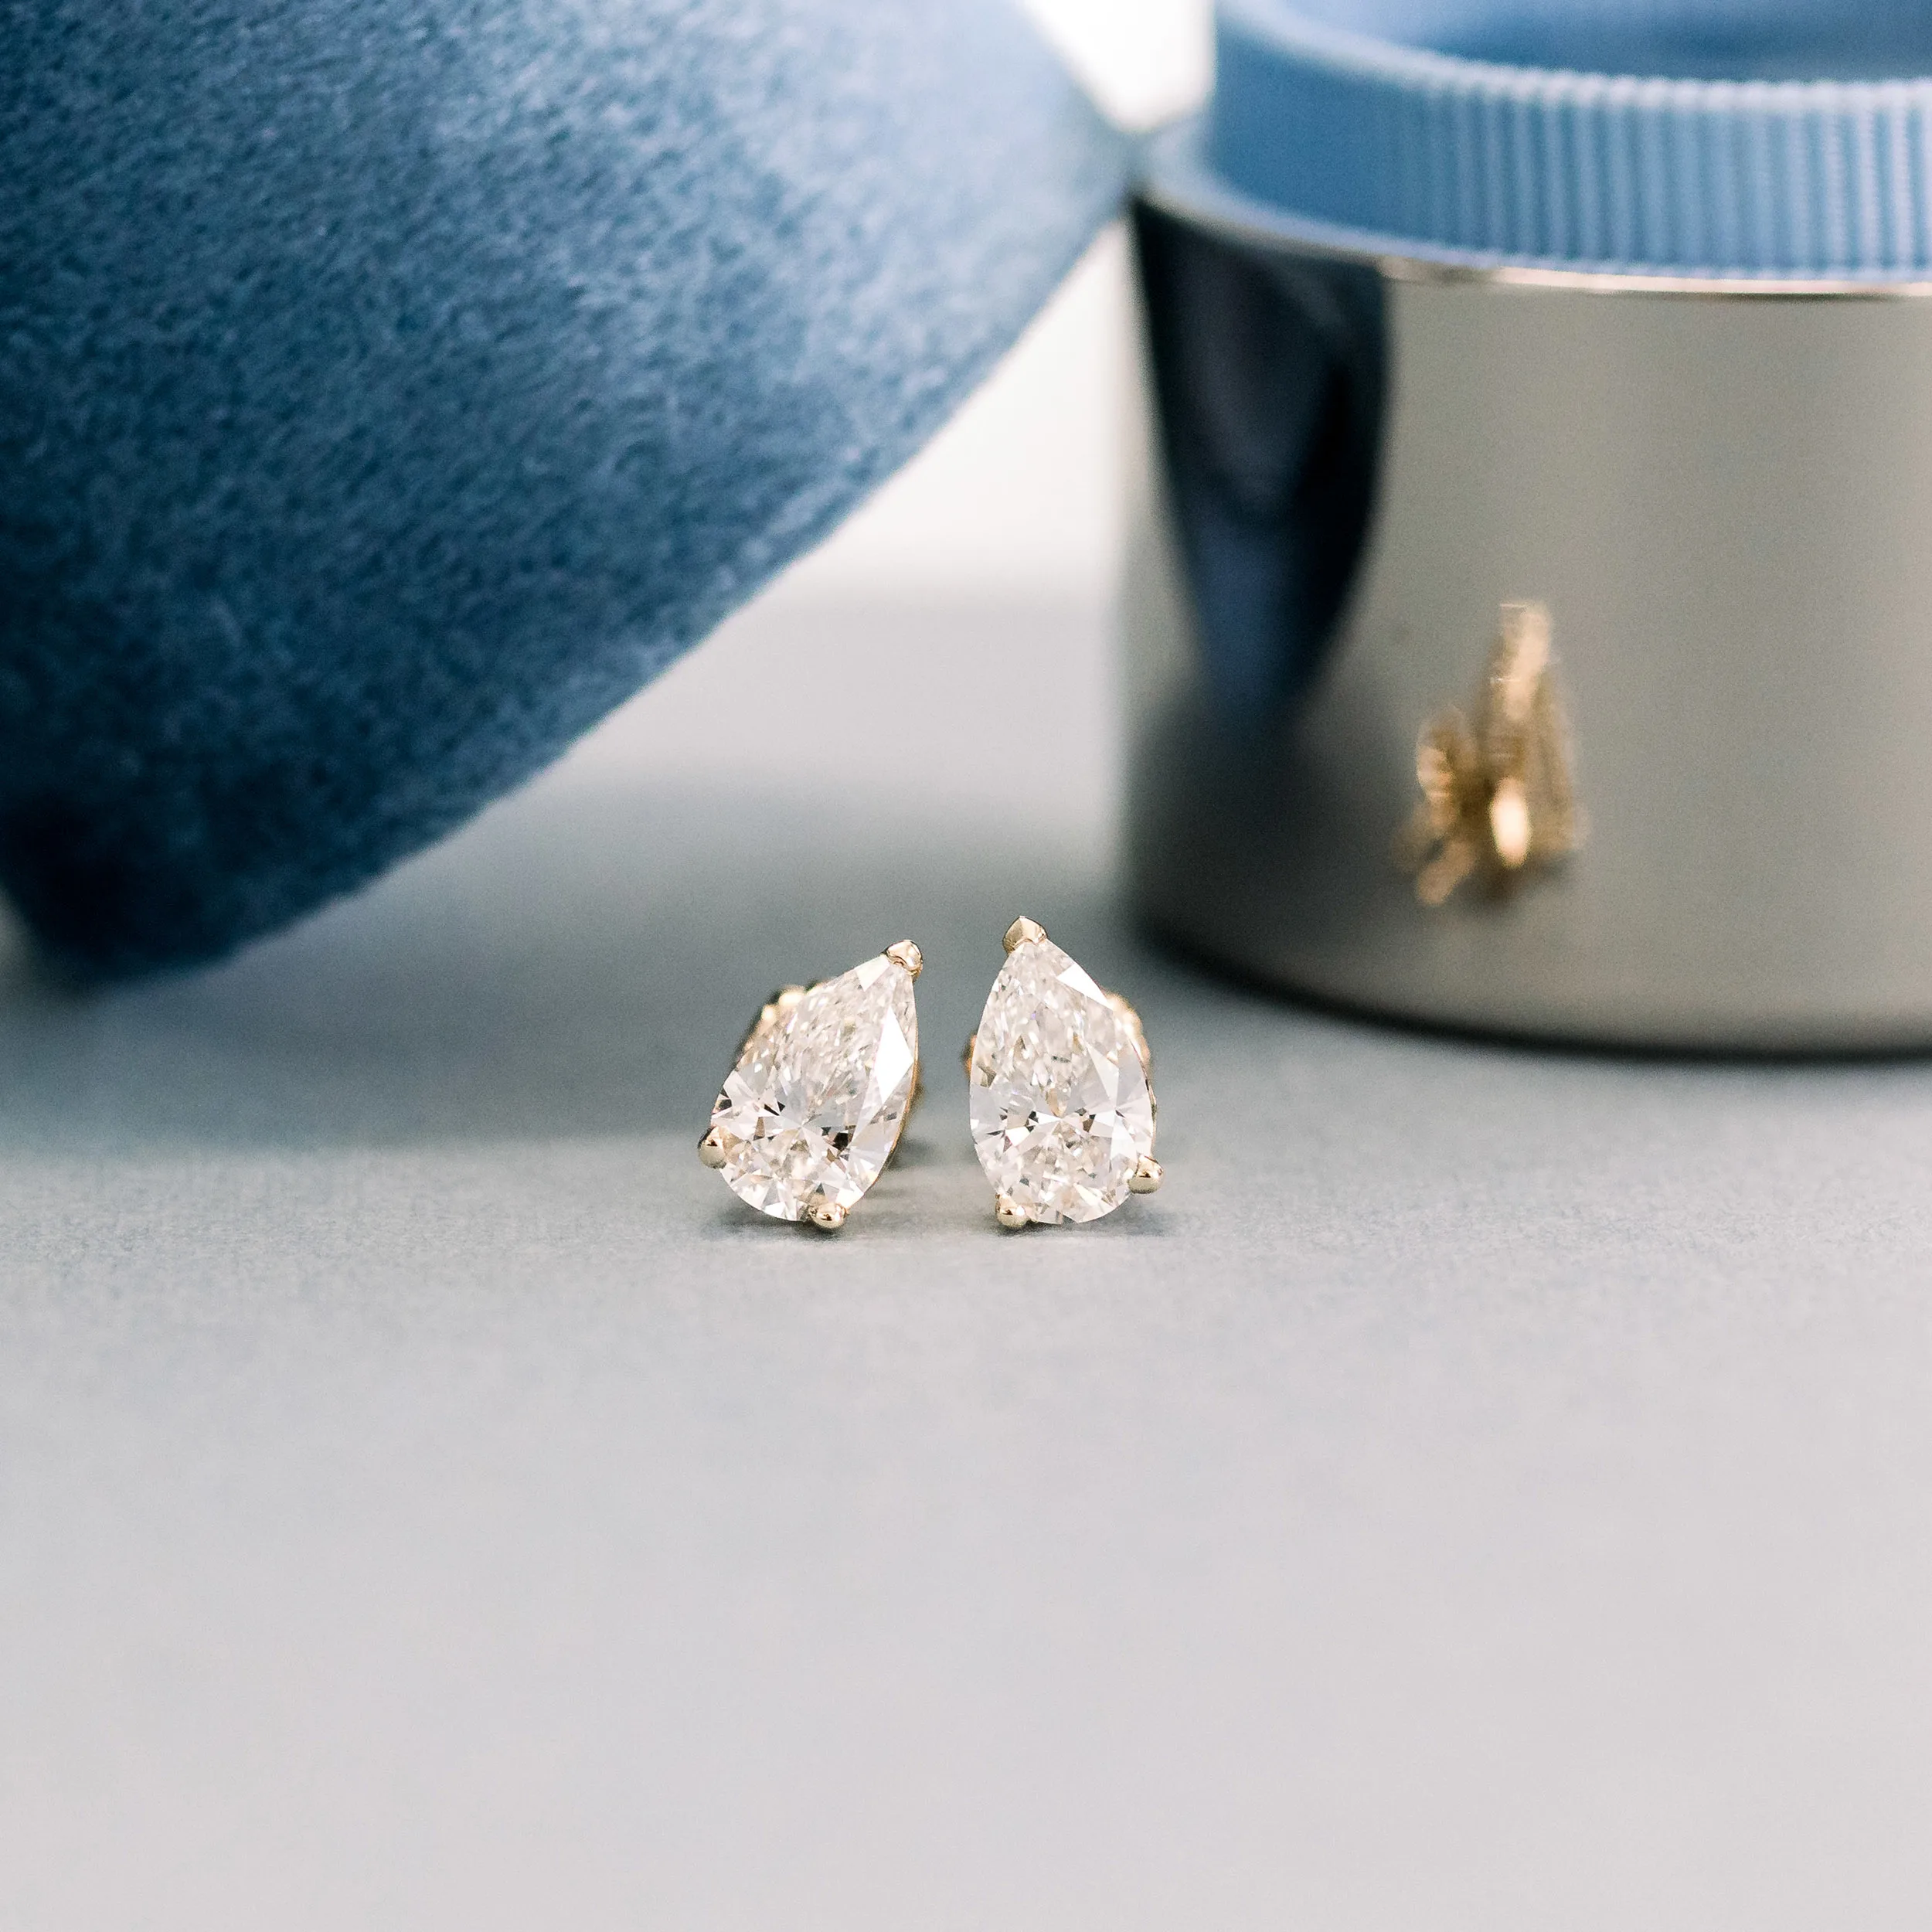 High Quality 1.4 Carat Lab Created Diamonds set in 14k Yellow Gold 1.4ctw Pear Cut Diamond Stud Earrings in 14k Yellow Gold (Main View)